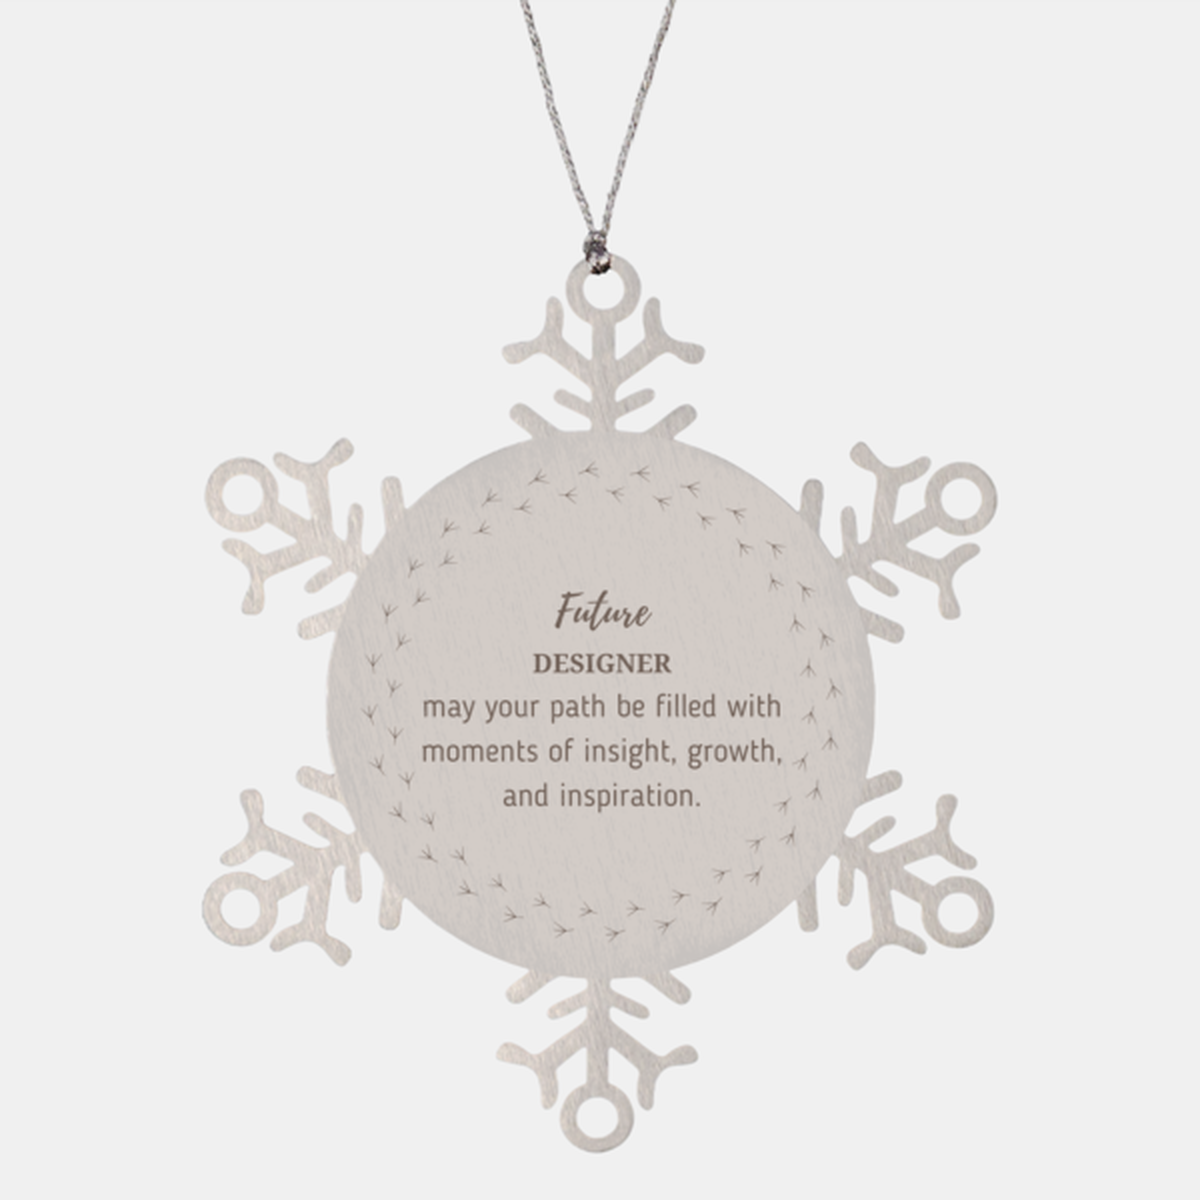 Future Designer Gifts, May your path be filled with moments of insight, Graduation Gifts for New Designer, Christmas Unique Snowflake Ornament For Men, Women, Friends